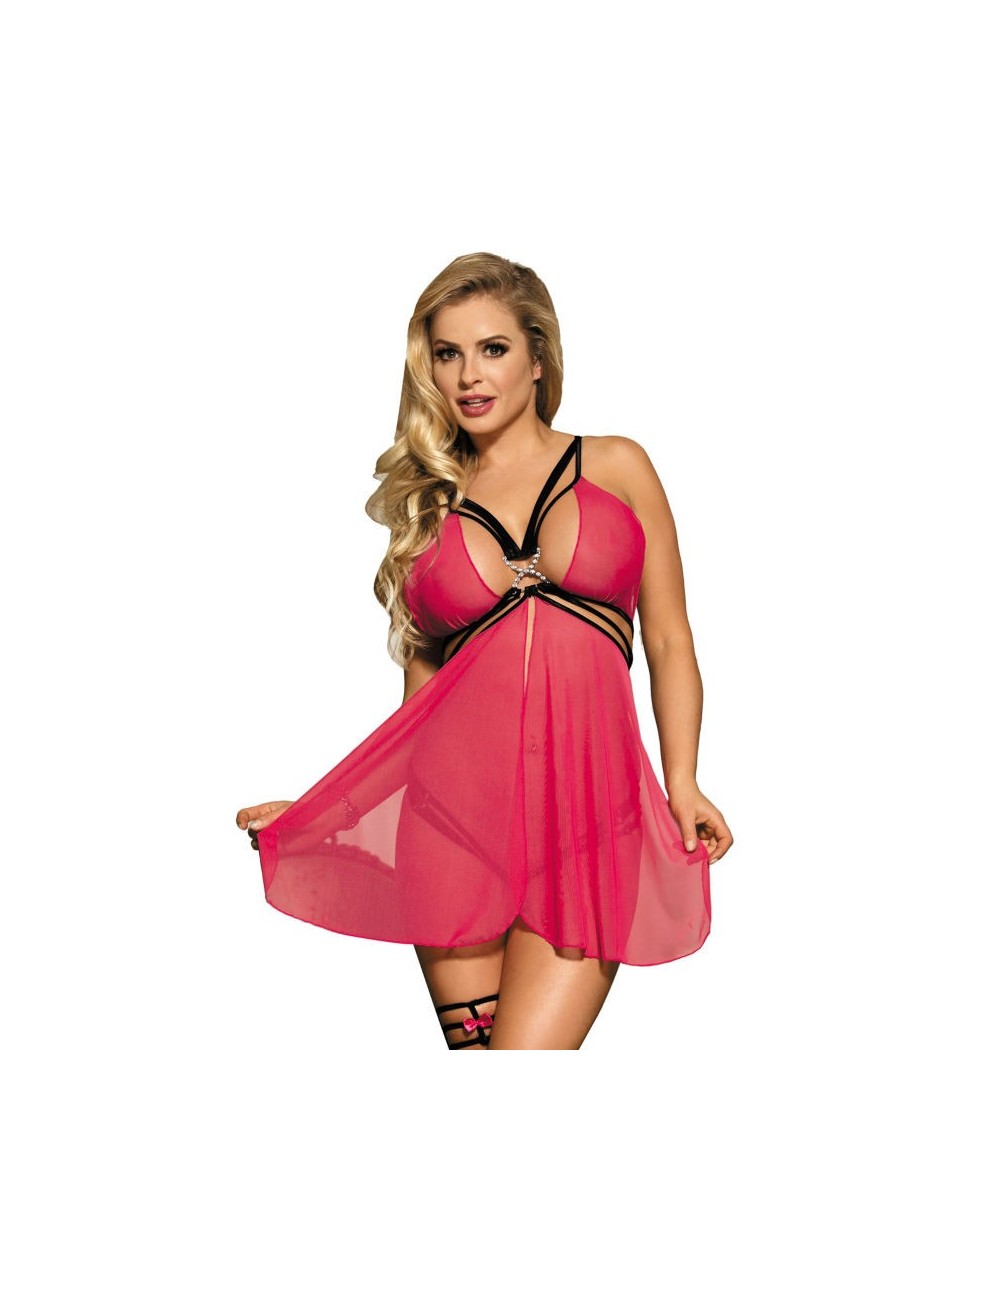 Subblime non couvert babydoll rose taille s / m